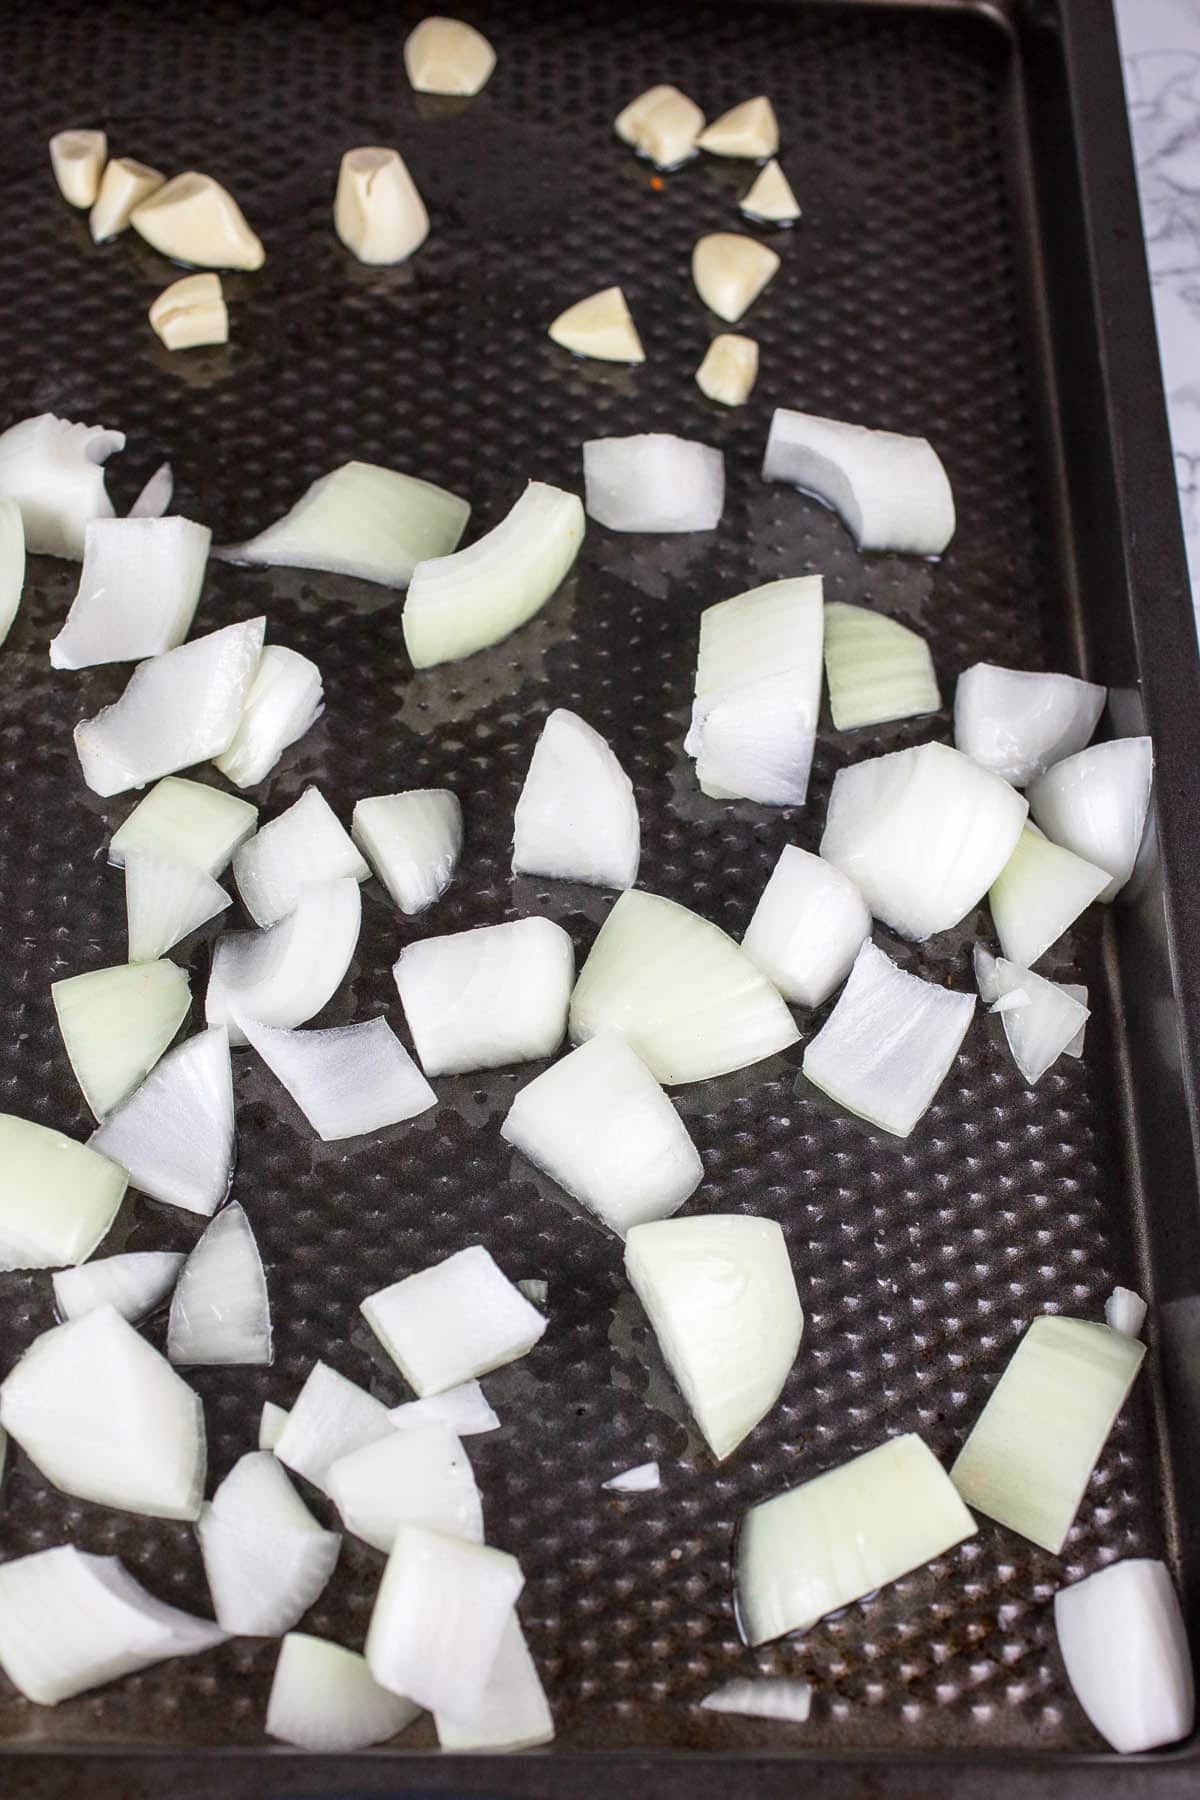 Garlic and onion chunks in olive oil on baking sheet.